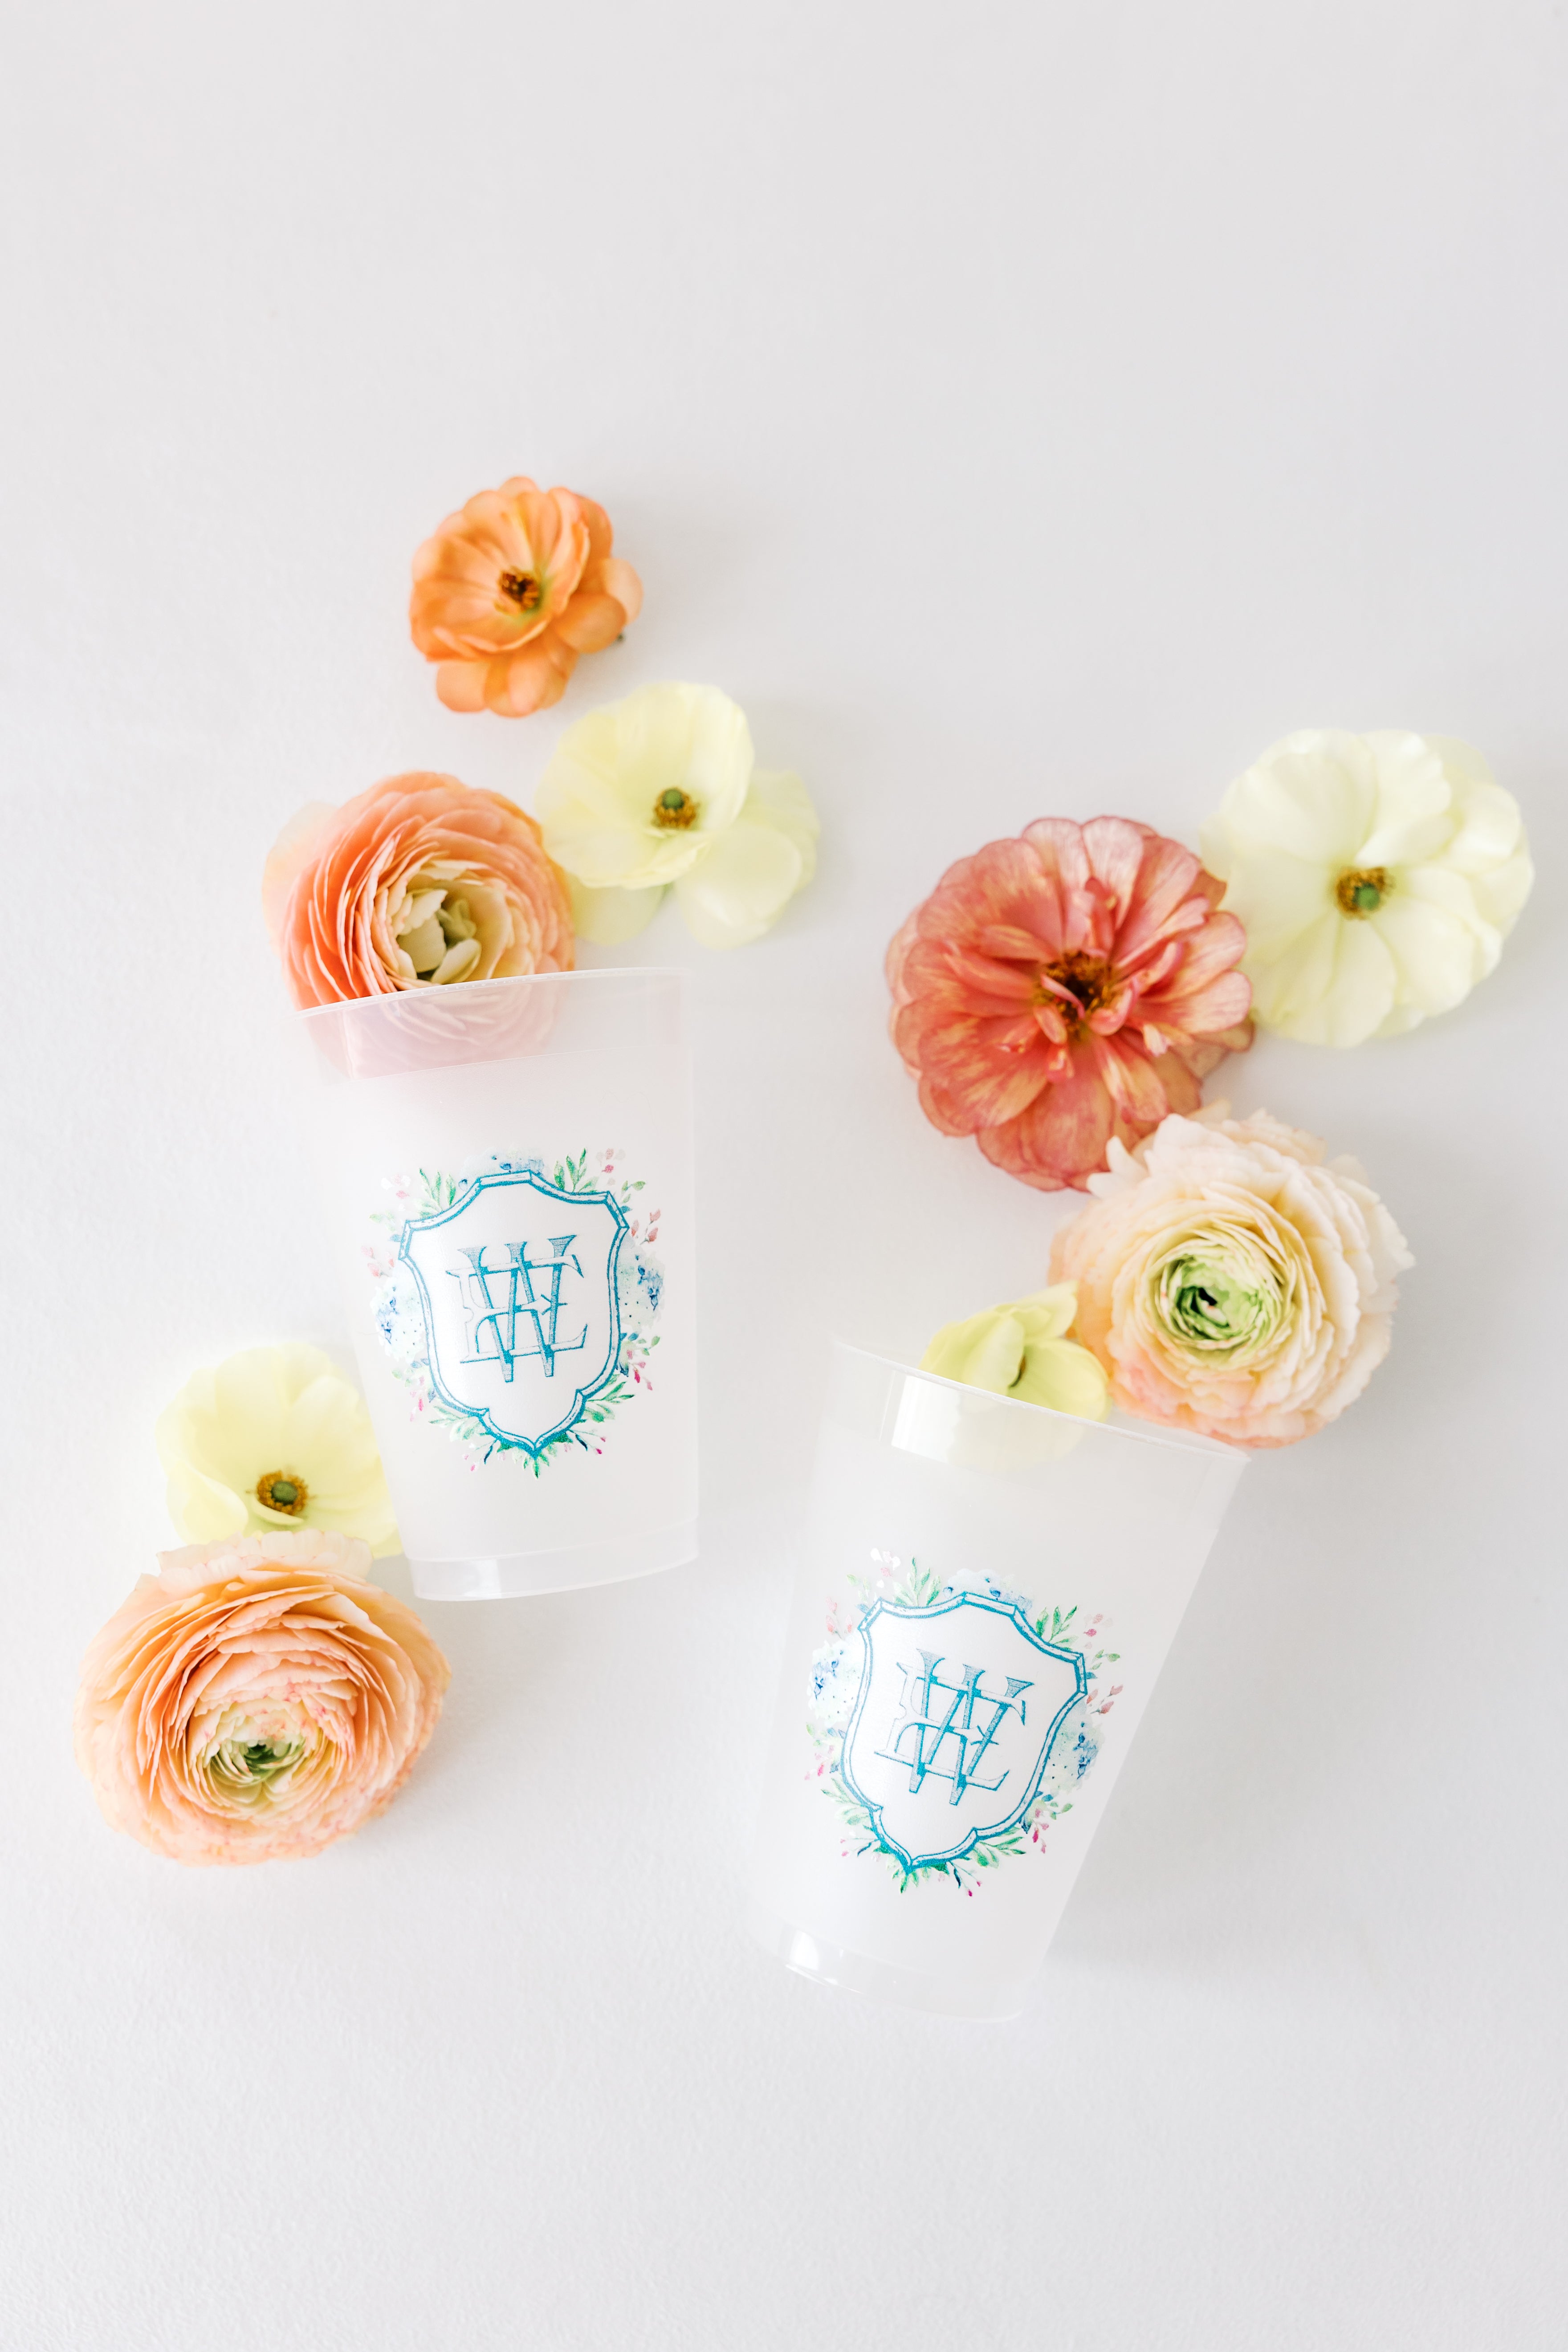 Ledgewood-Fine-Stationery-Luxury-Wedding-Details-Full-Color-Shatterproof-Frosted-Cups